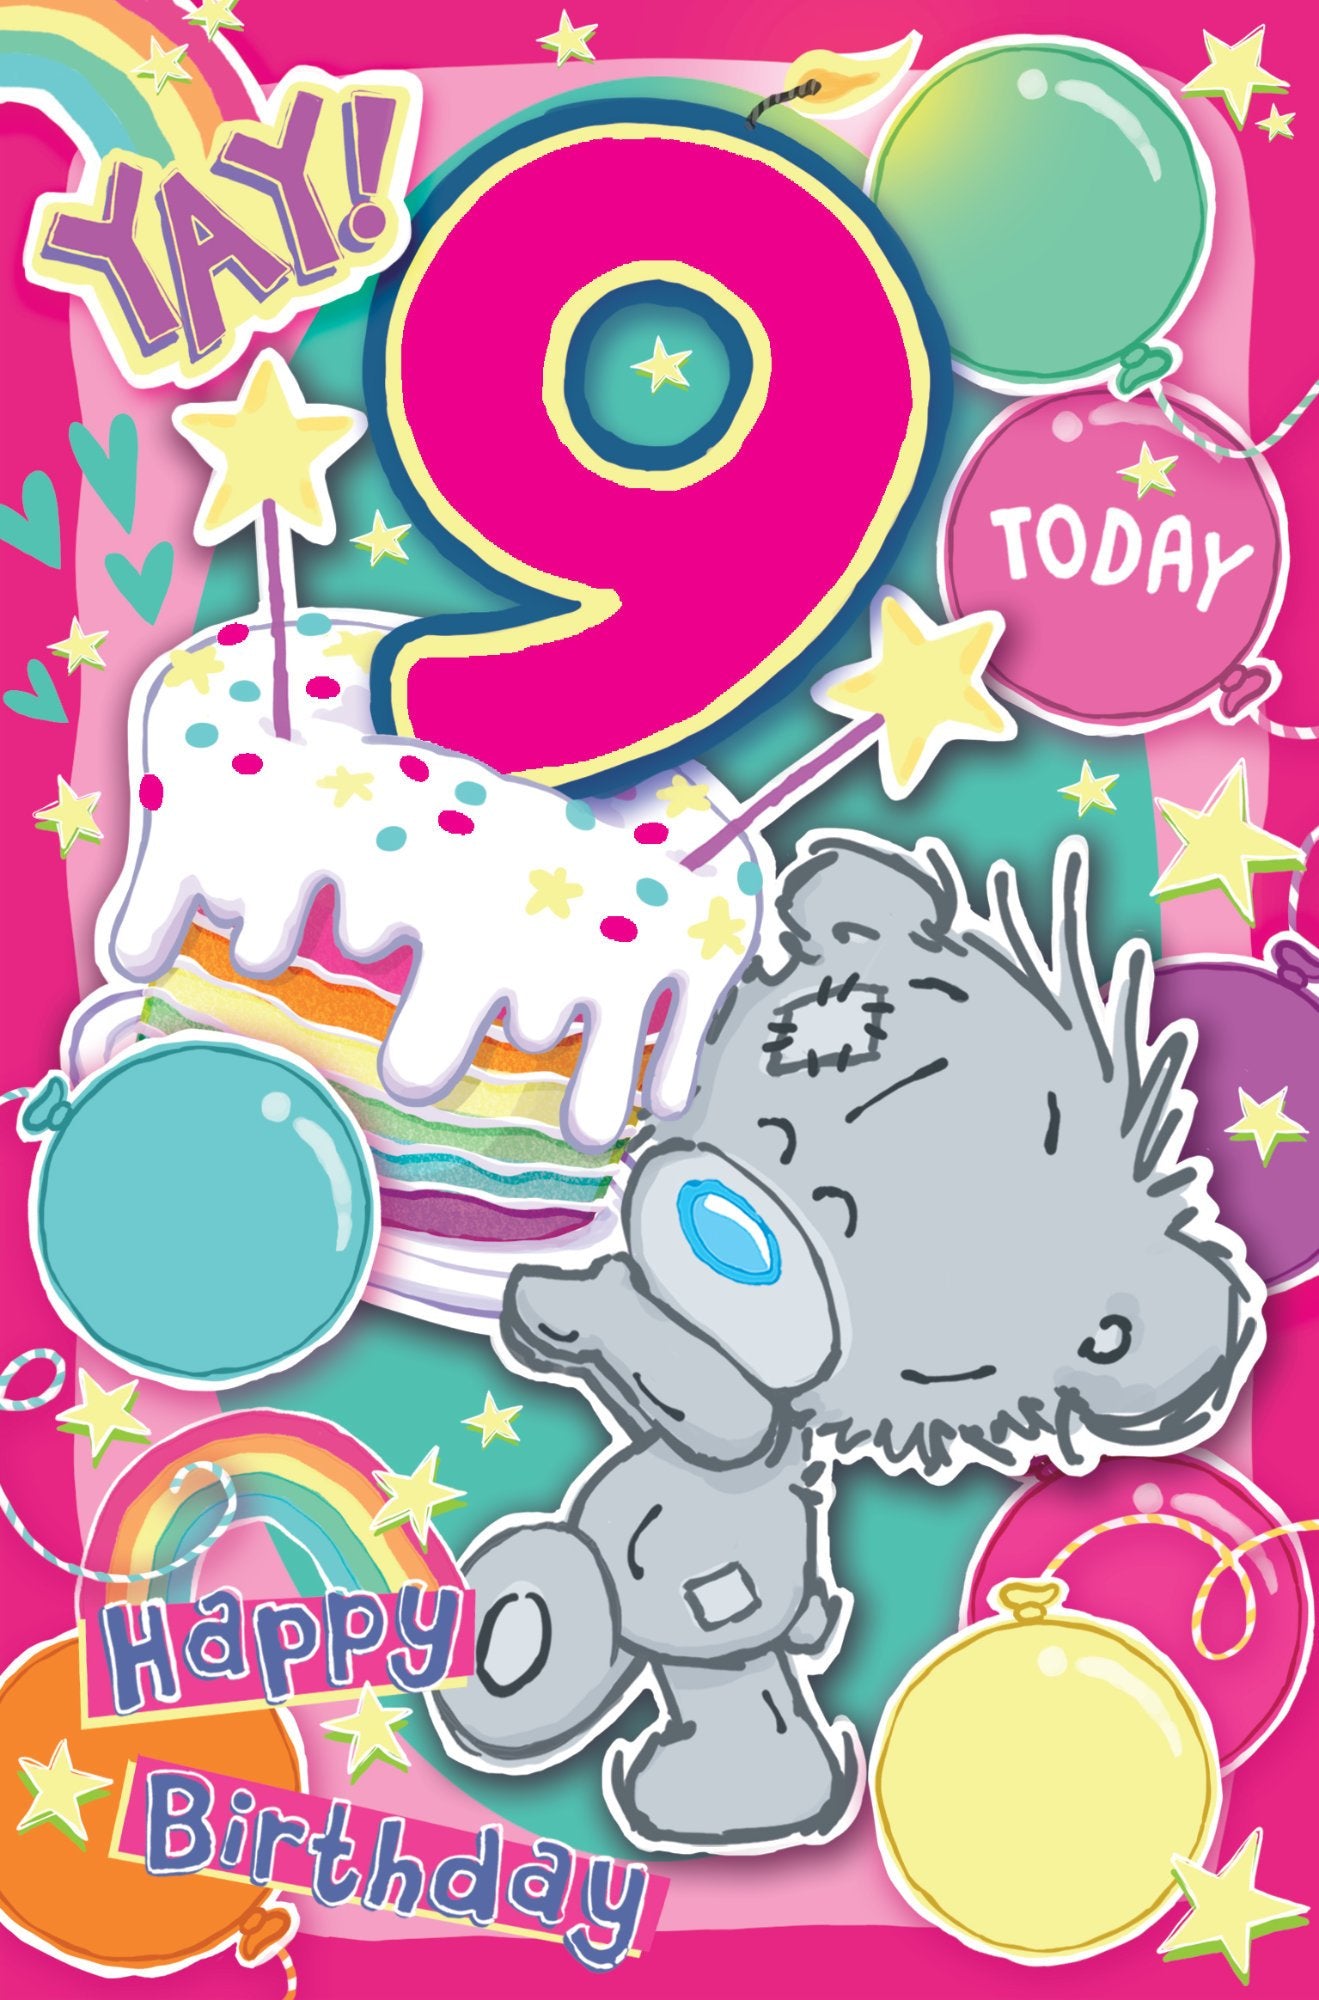 Photograph of 9th Birthday Teddy Cake Greetings Card at Nicole's Shop